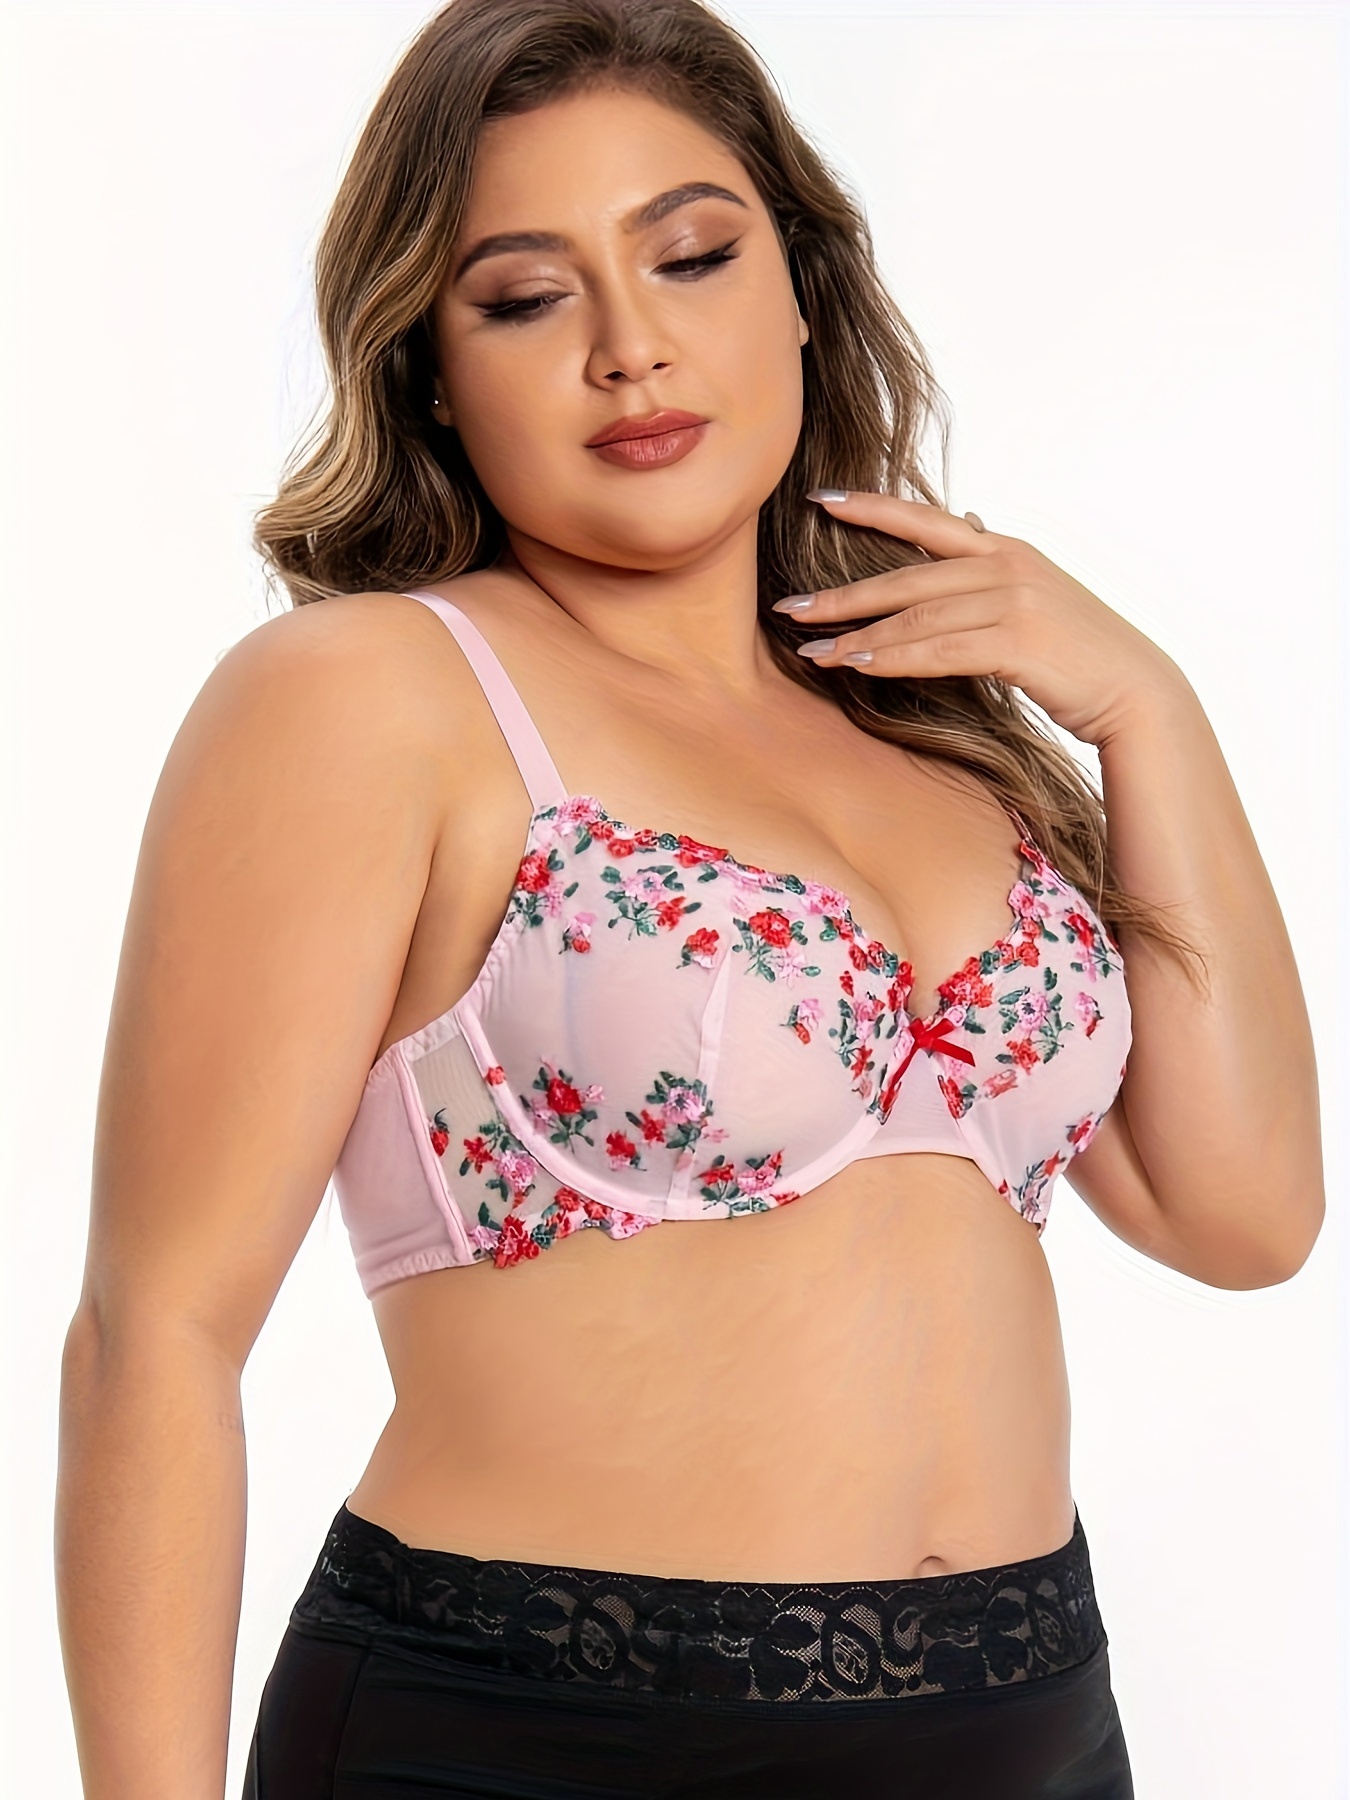 Plus Size Simple Bra, Women's Plus Solid Seamless Striped Adjustable  Bralette With Removable Pads